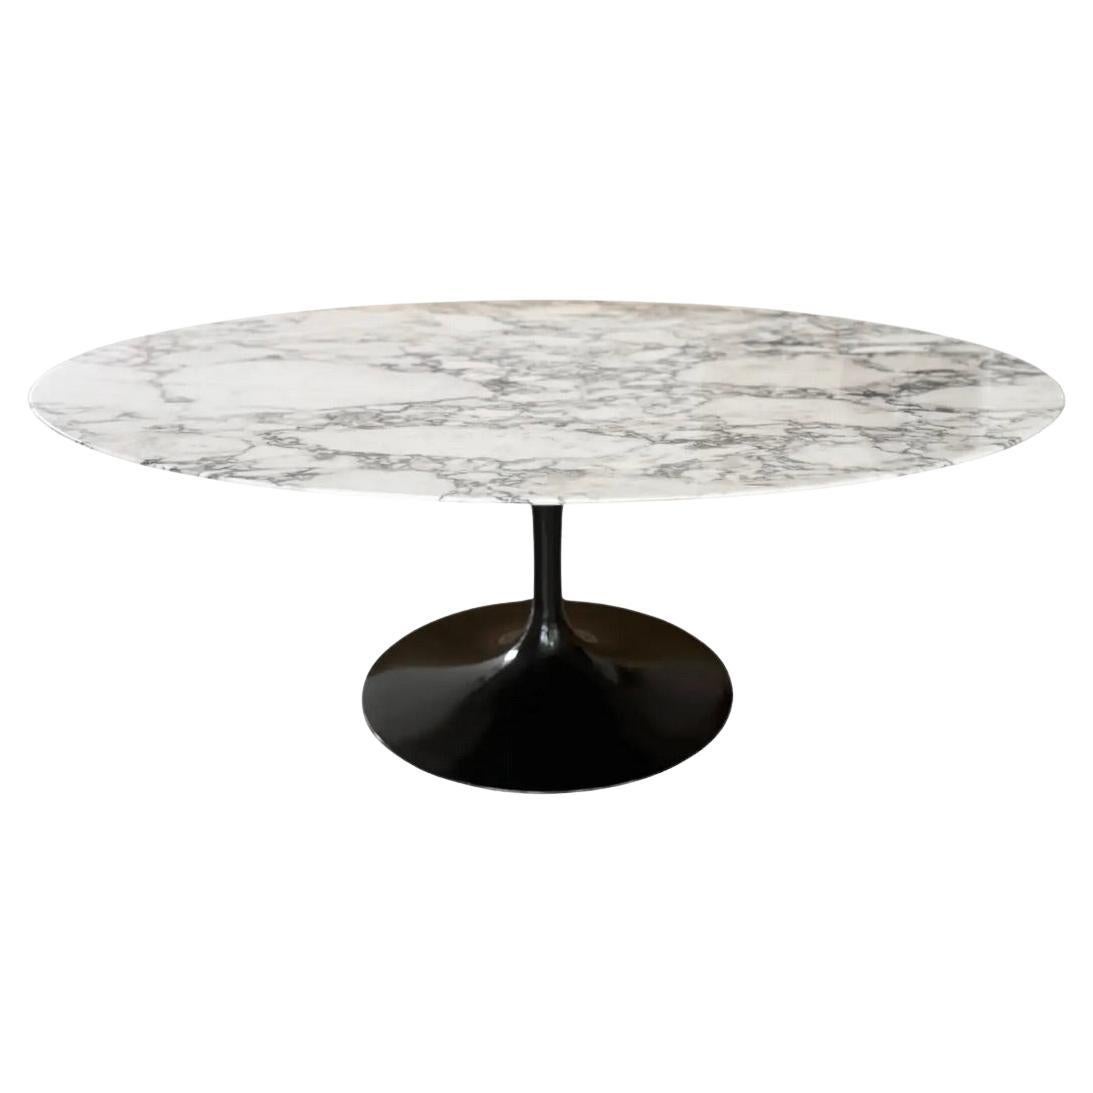 Mid Century Modern Oval Tulip Coffee Table in Marble by Eero Saarinen for Knoll For Sale